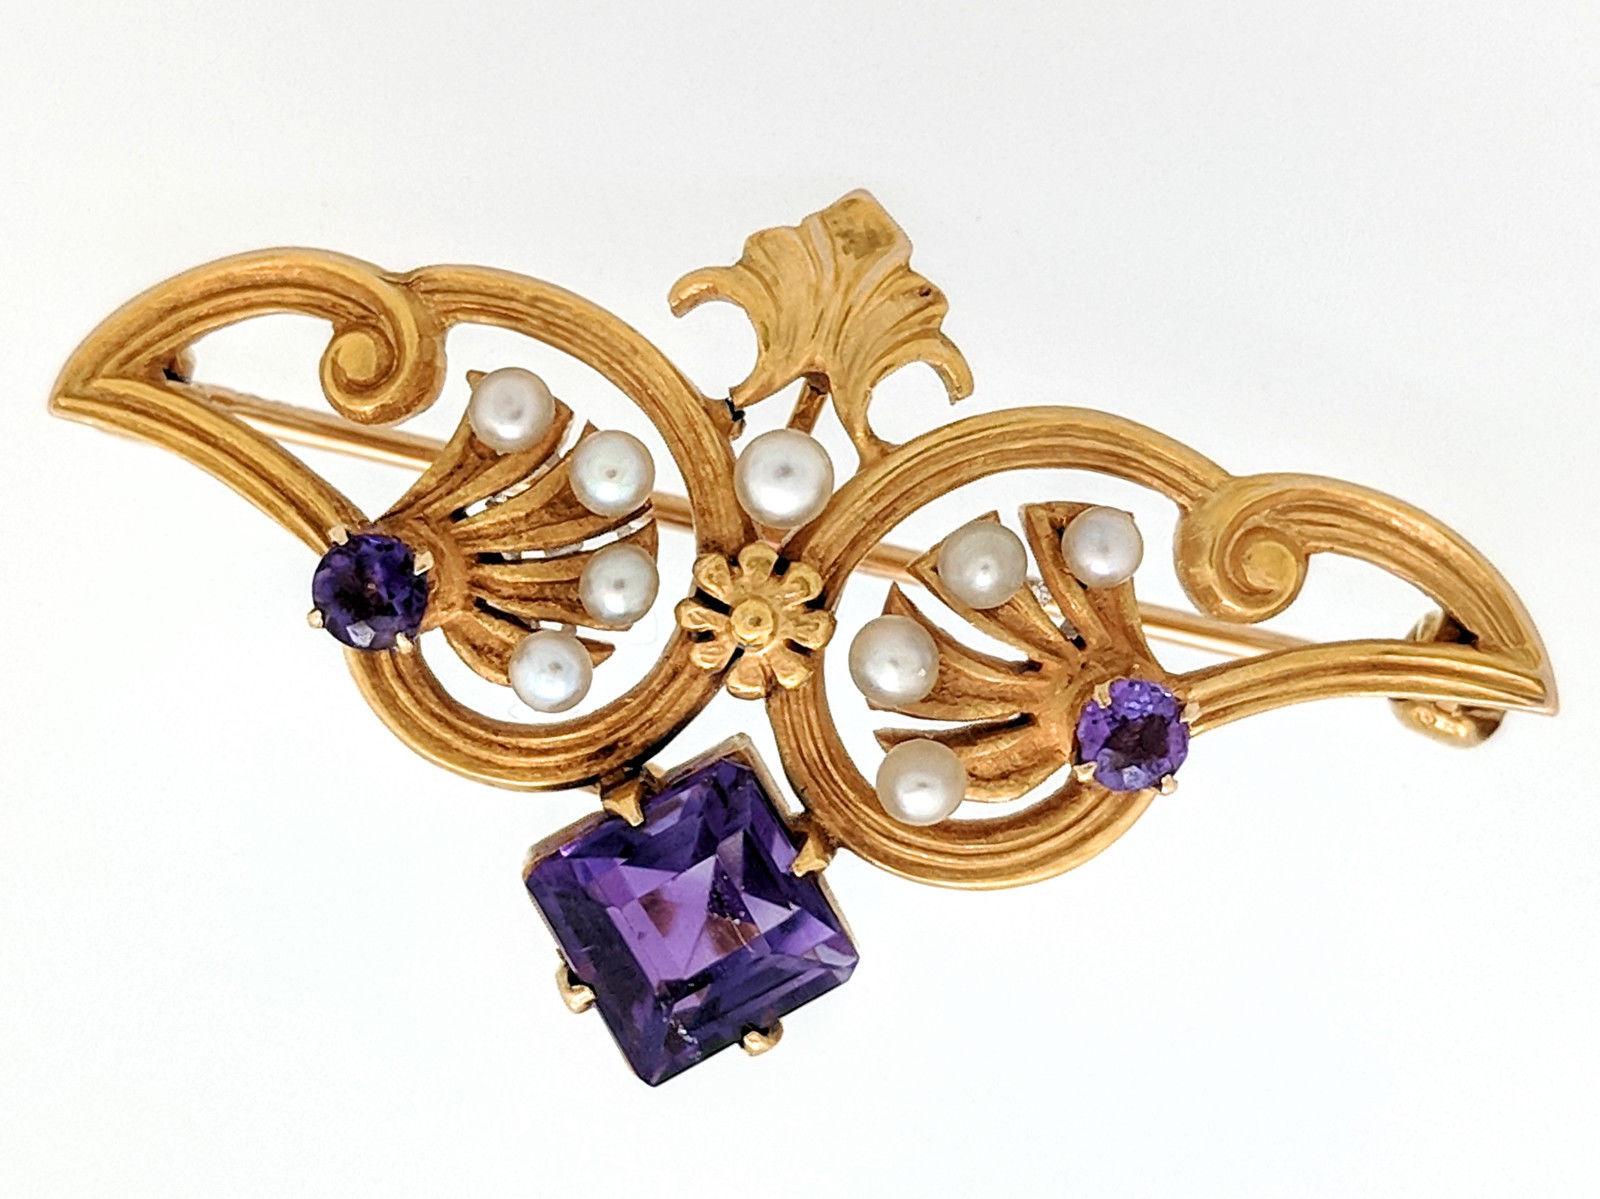 14K Yellow Gold Amethyst and Seed Pearl Estate Brooch Pin

You are viewing a Vintage Amethyst & Cultured Seed Pearl Brooch Pin.

This brooch is crafted from 14 karat yellow gold and weigh 4.1 grams. It features (1) 6mm x 6mm princess cut amethyst,